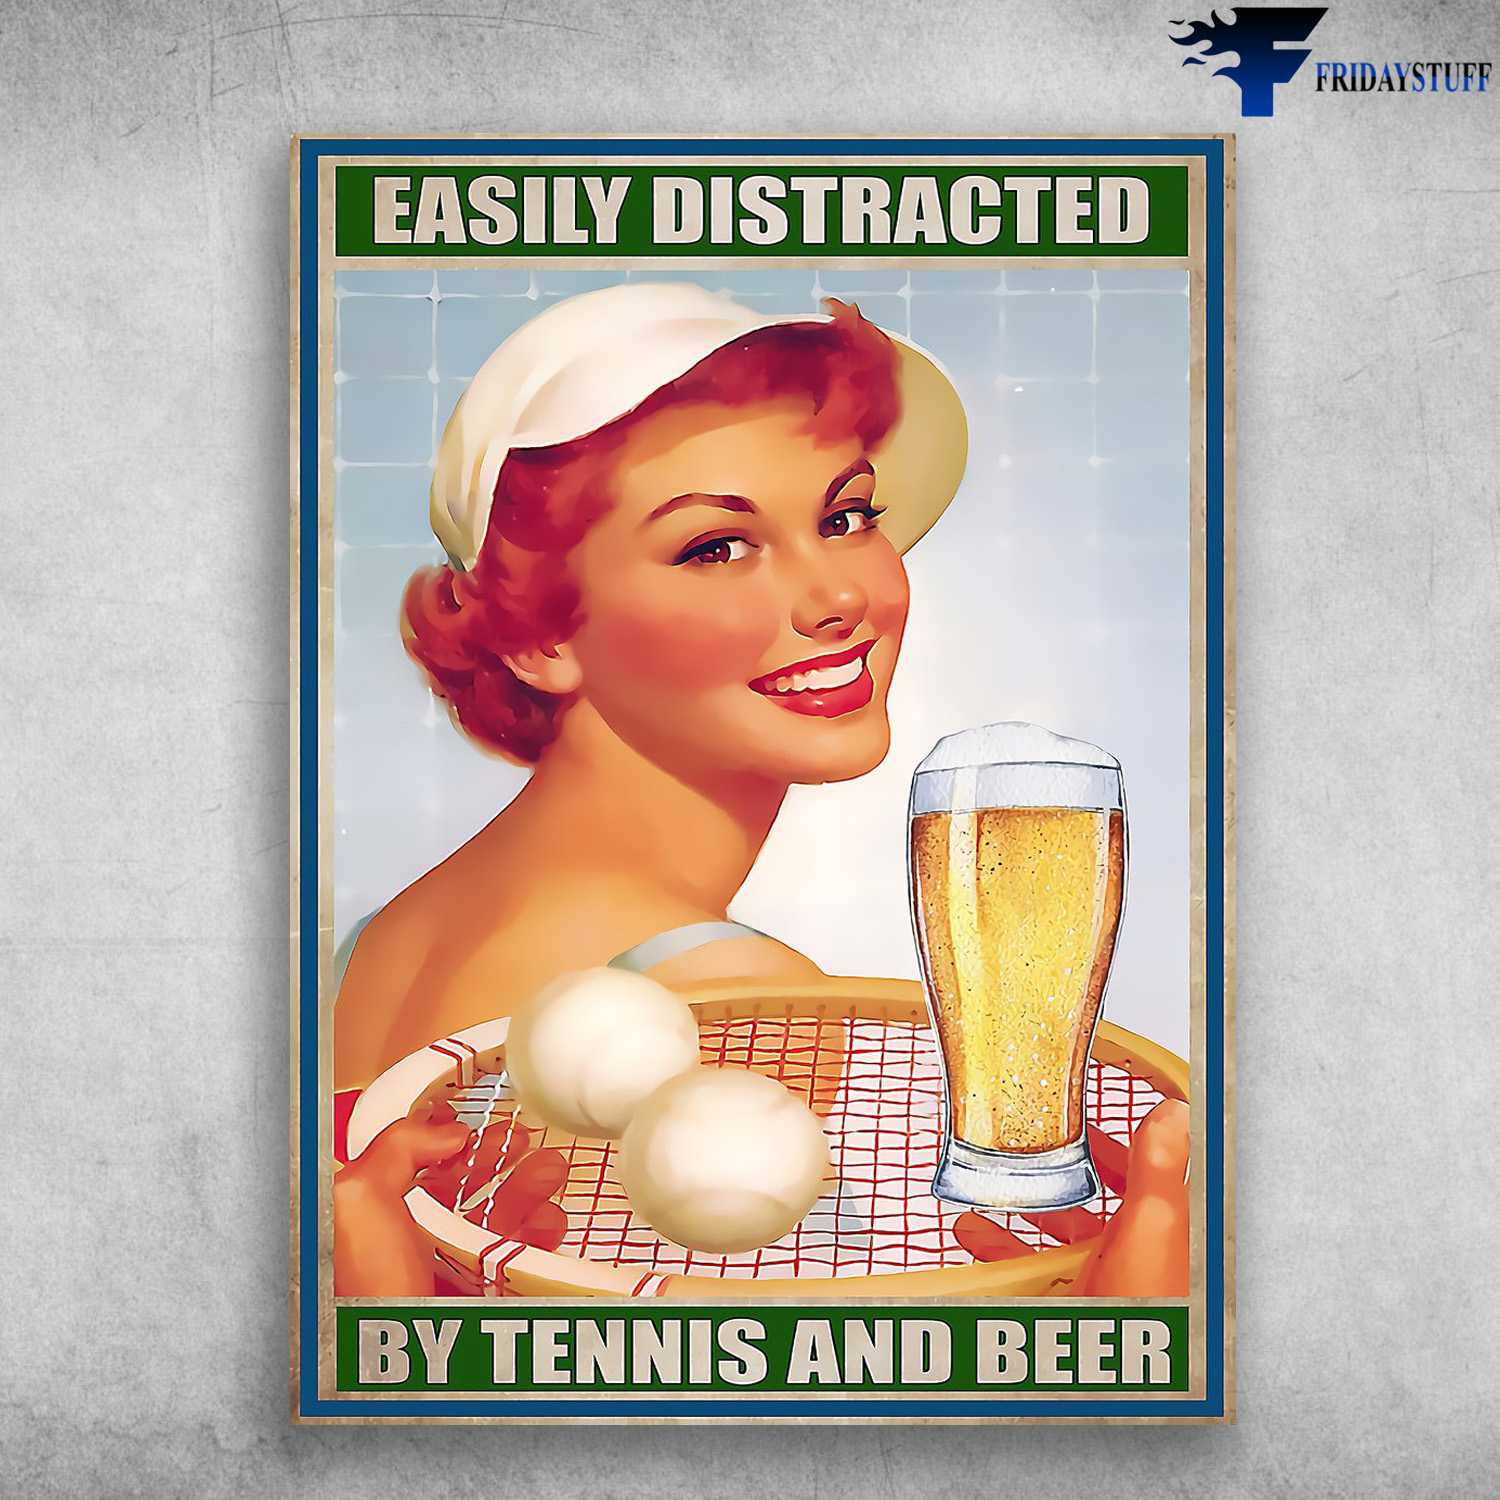 Tennis With Beer, Tennis Lover - Easily Distracted By, Tennis And Beer